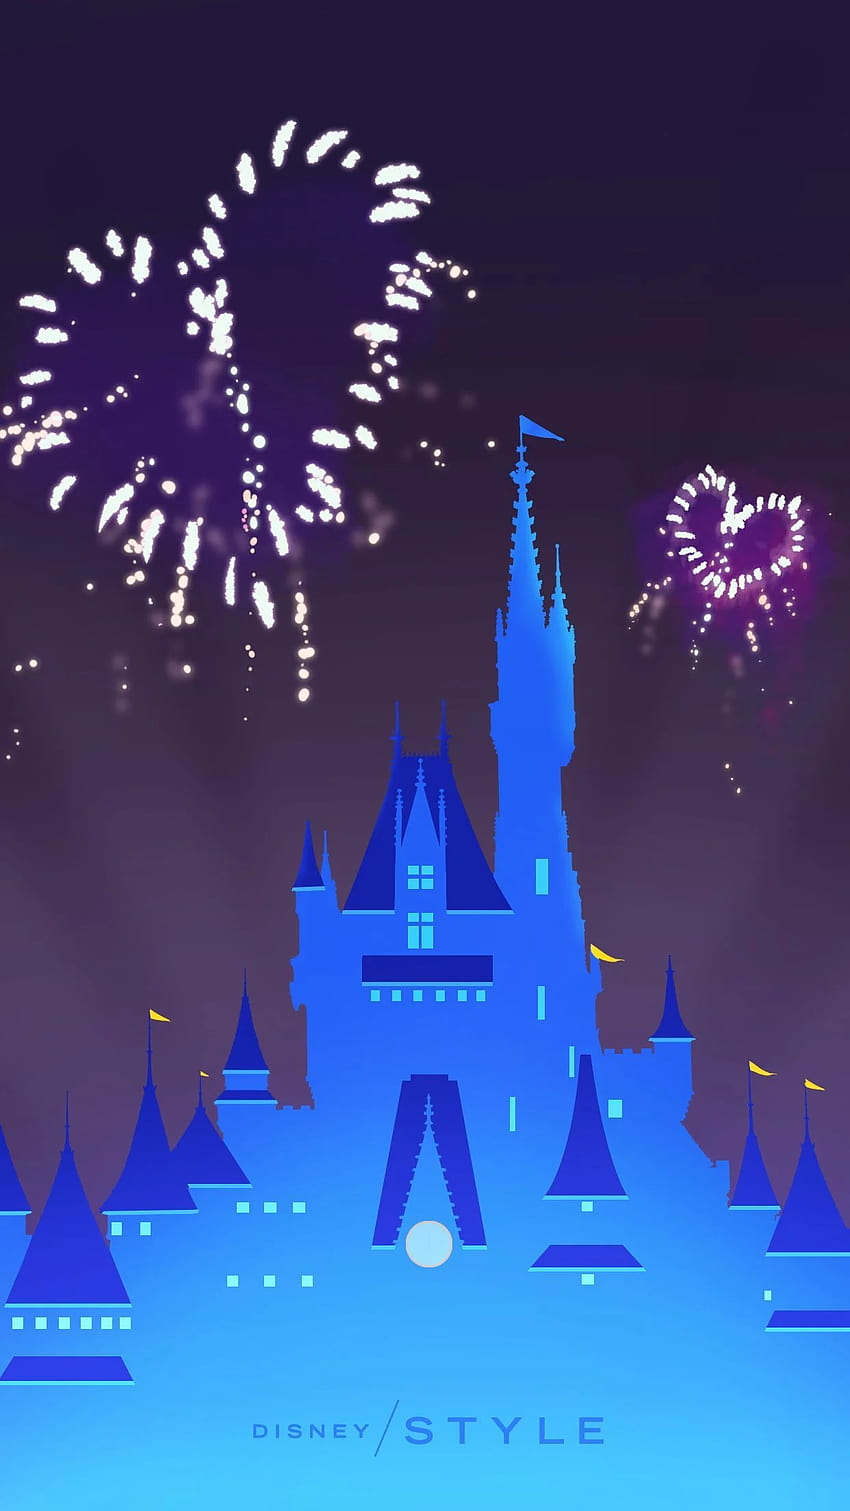 Get Your Phone Ready for Valentine's Day With These Disney Parks HD phone wallpaper